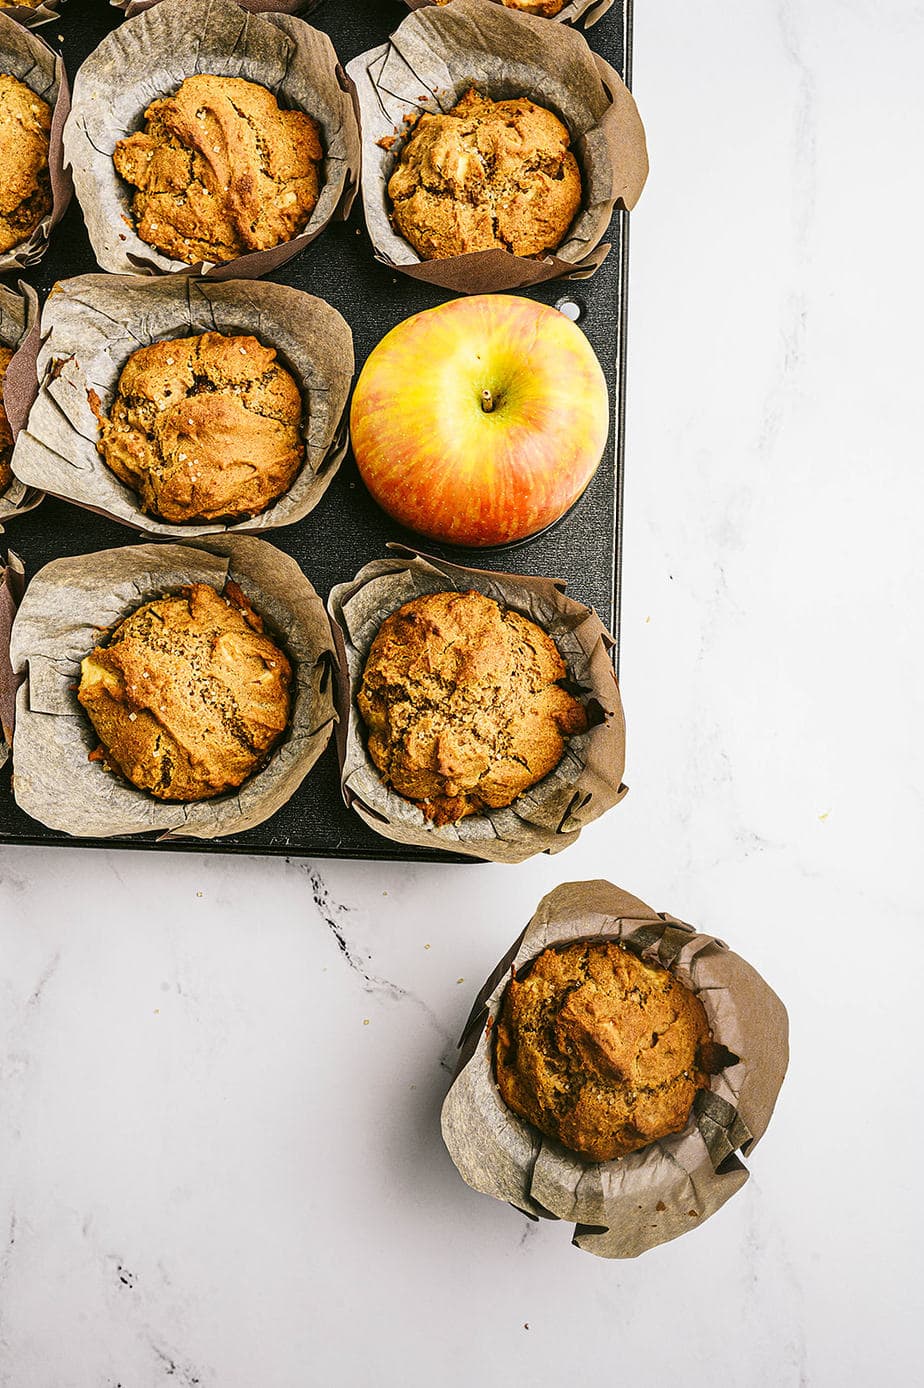 Overhead image: parchment lined muffins in a muffin tin. One muffin is out of its place, off to the side and a whole apple takes its place in the tin.